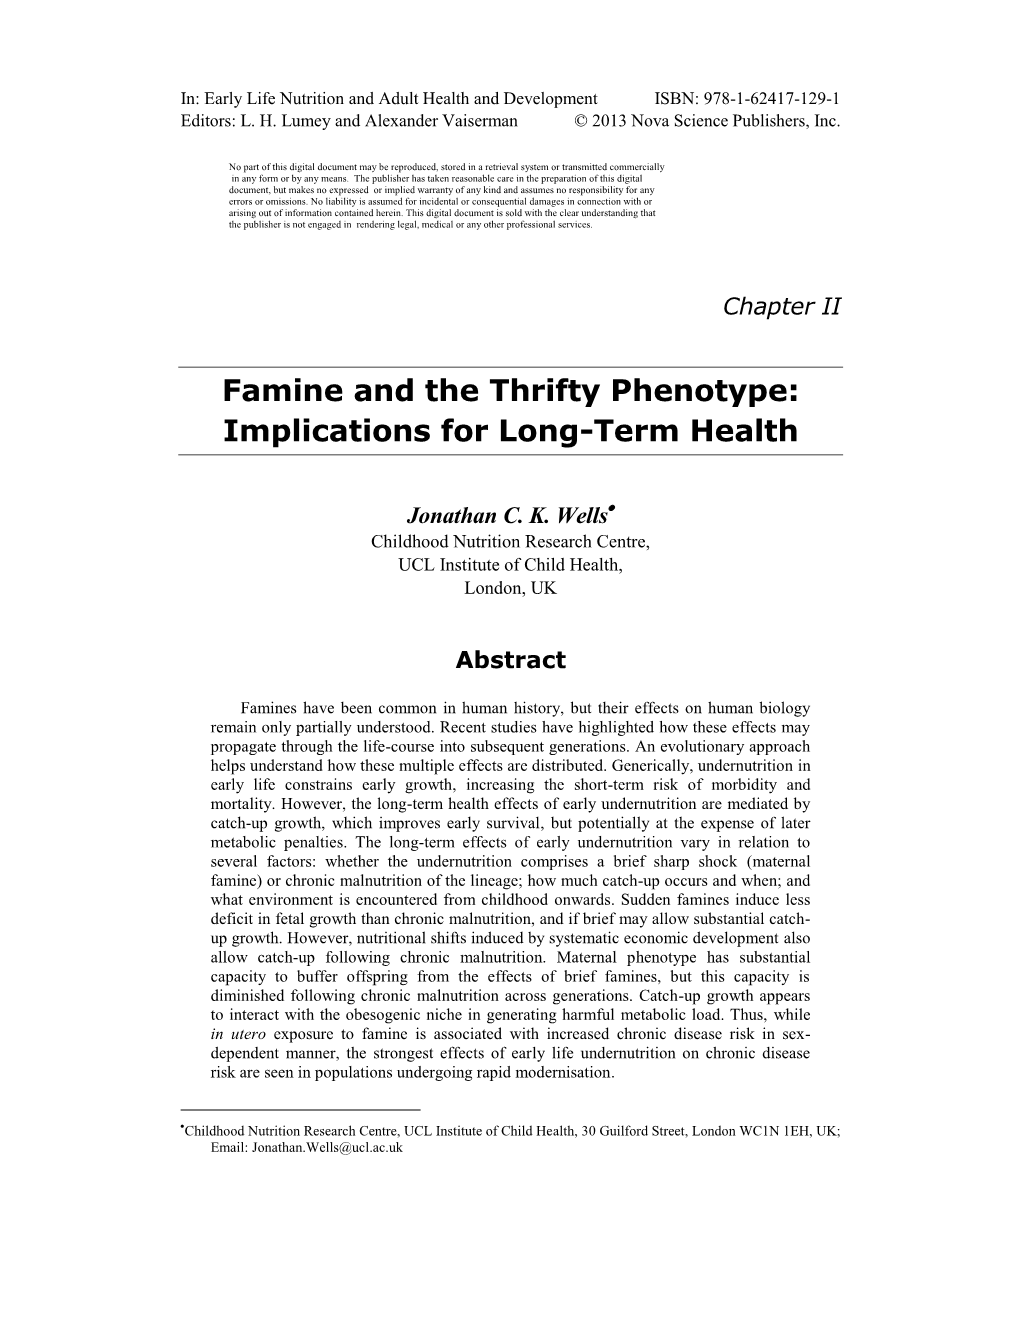 Famine and the Thrifty Phenotype: Implications for Long-Term Health